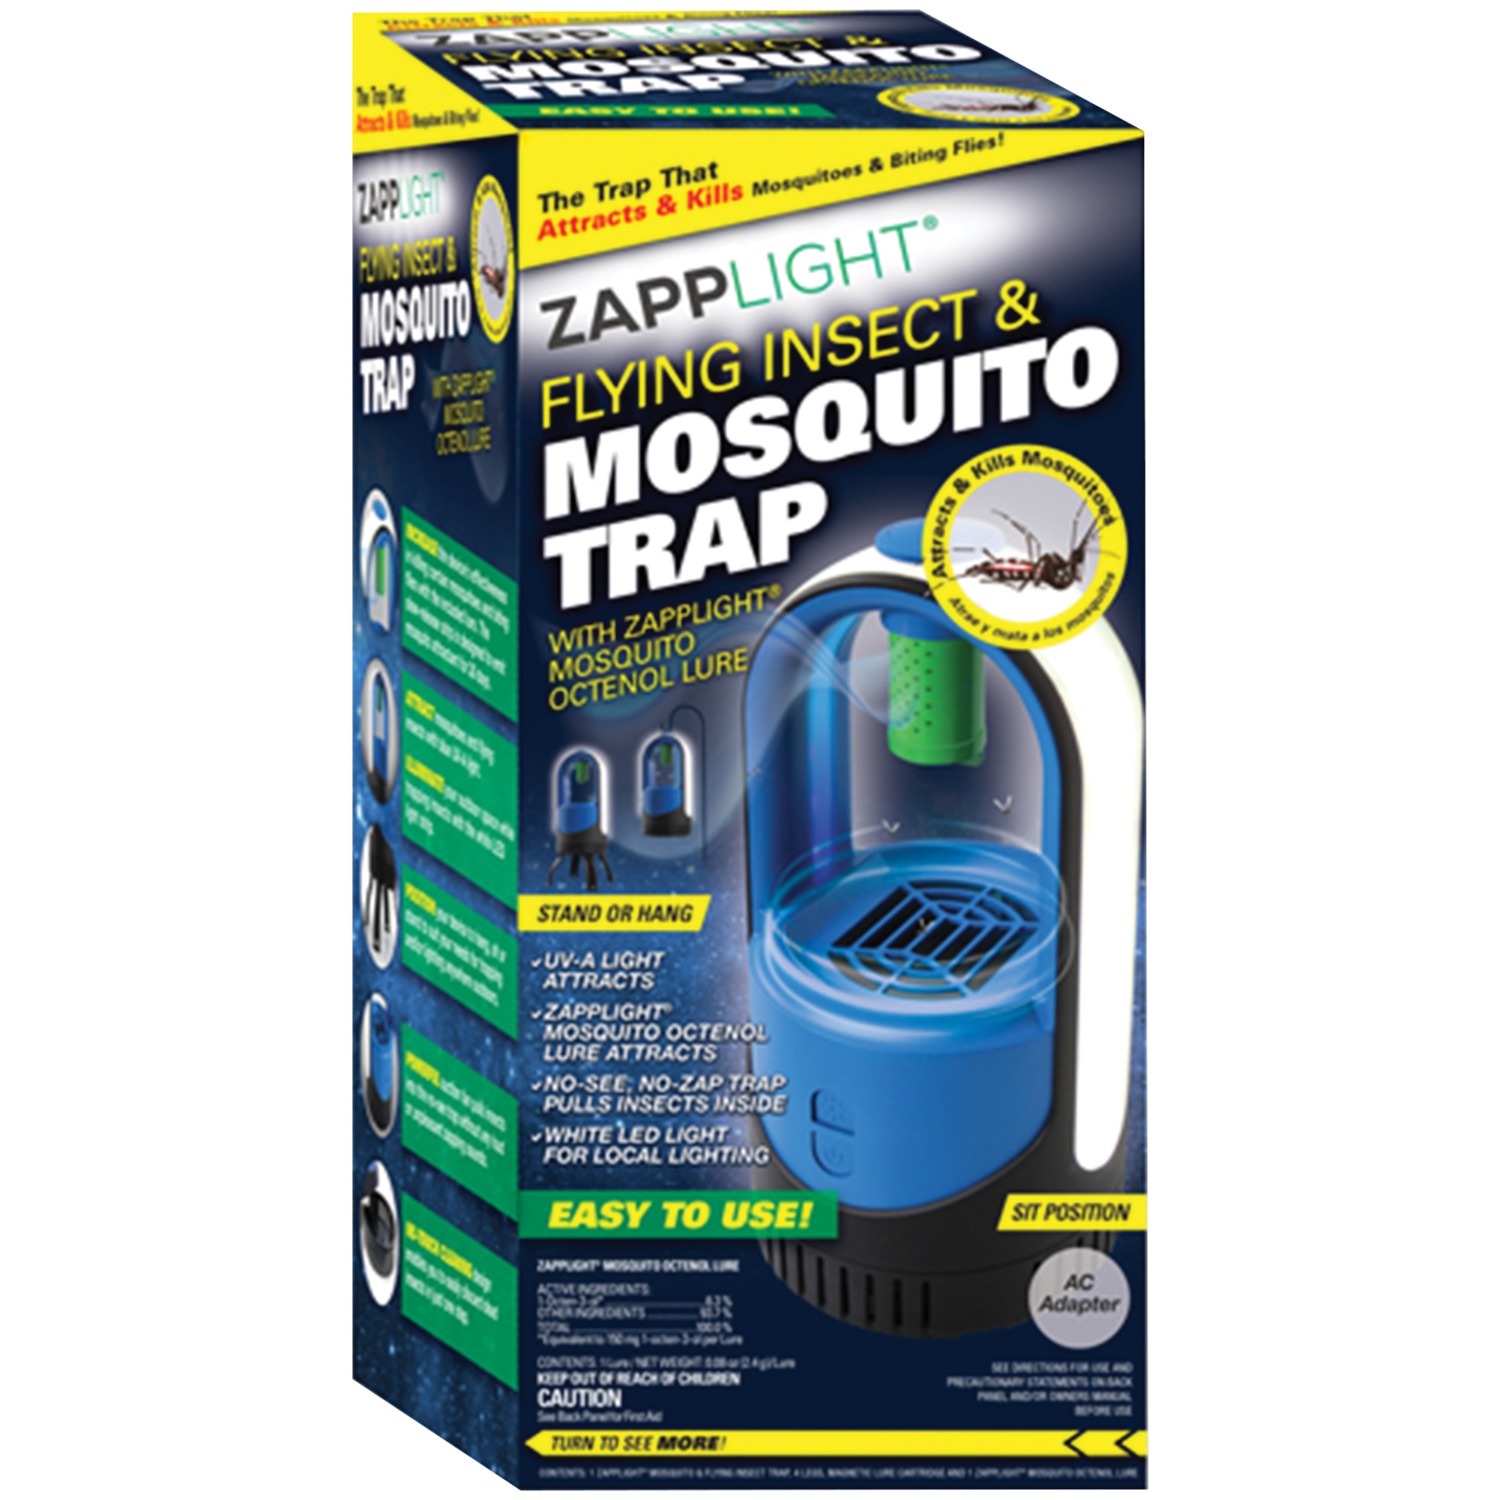 Zapplight DZL Insect Trap - image 1 of 2